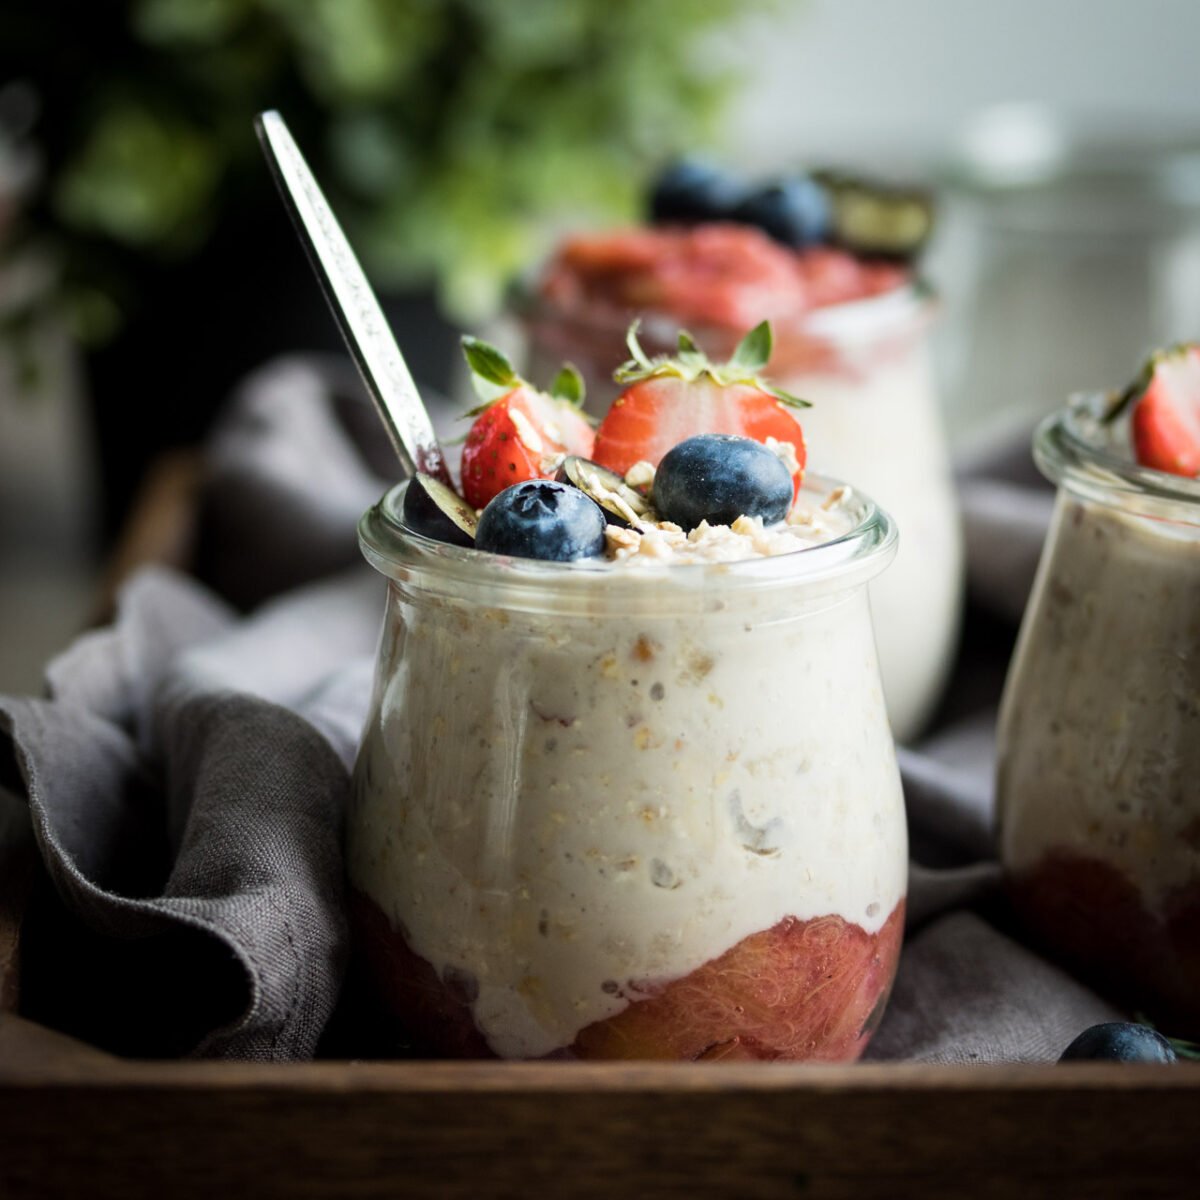 Vegan overnight oats with a sweet rhubarb compote - the perfect healthy, on the go breakfast!